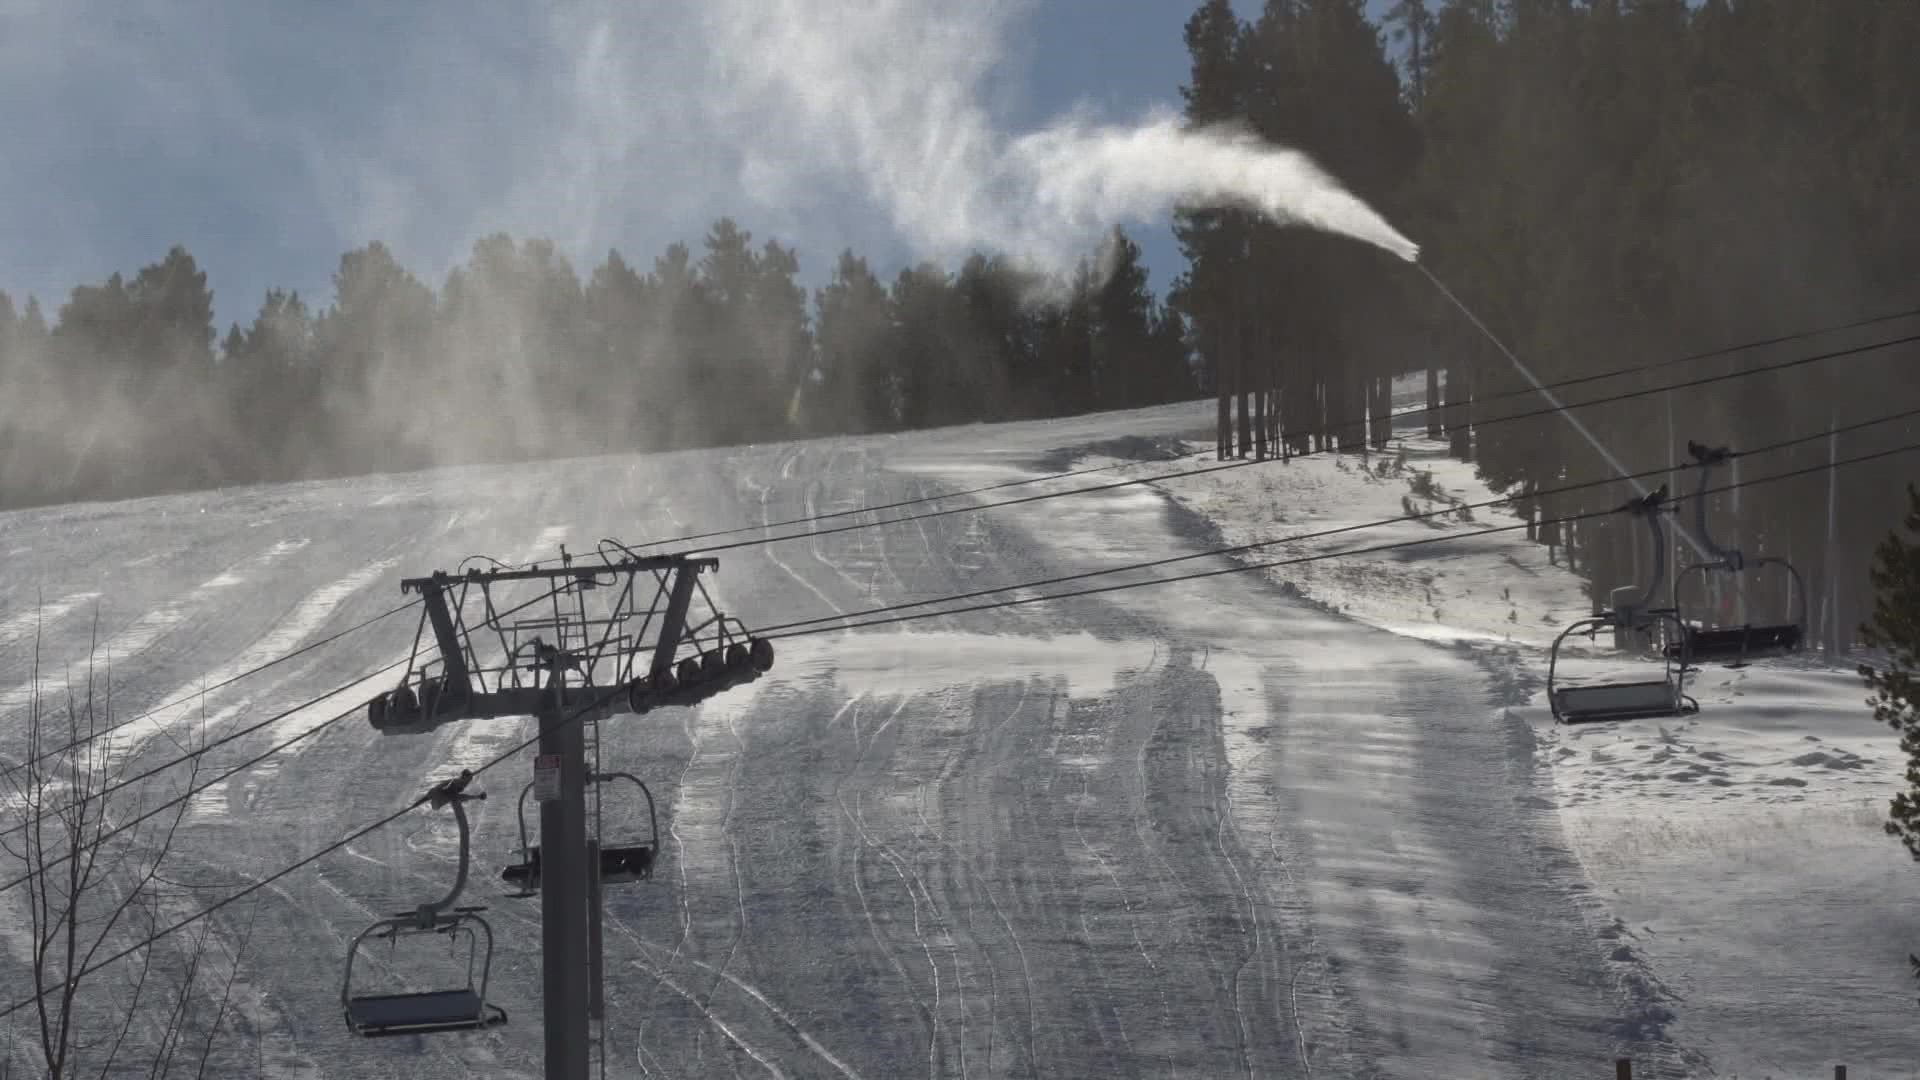 Good snow and even better snowmaking conditions mean one of the most popular ski areas in the country is opening today.